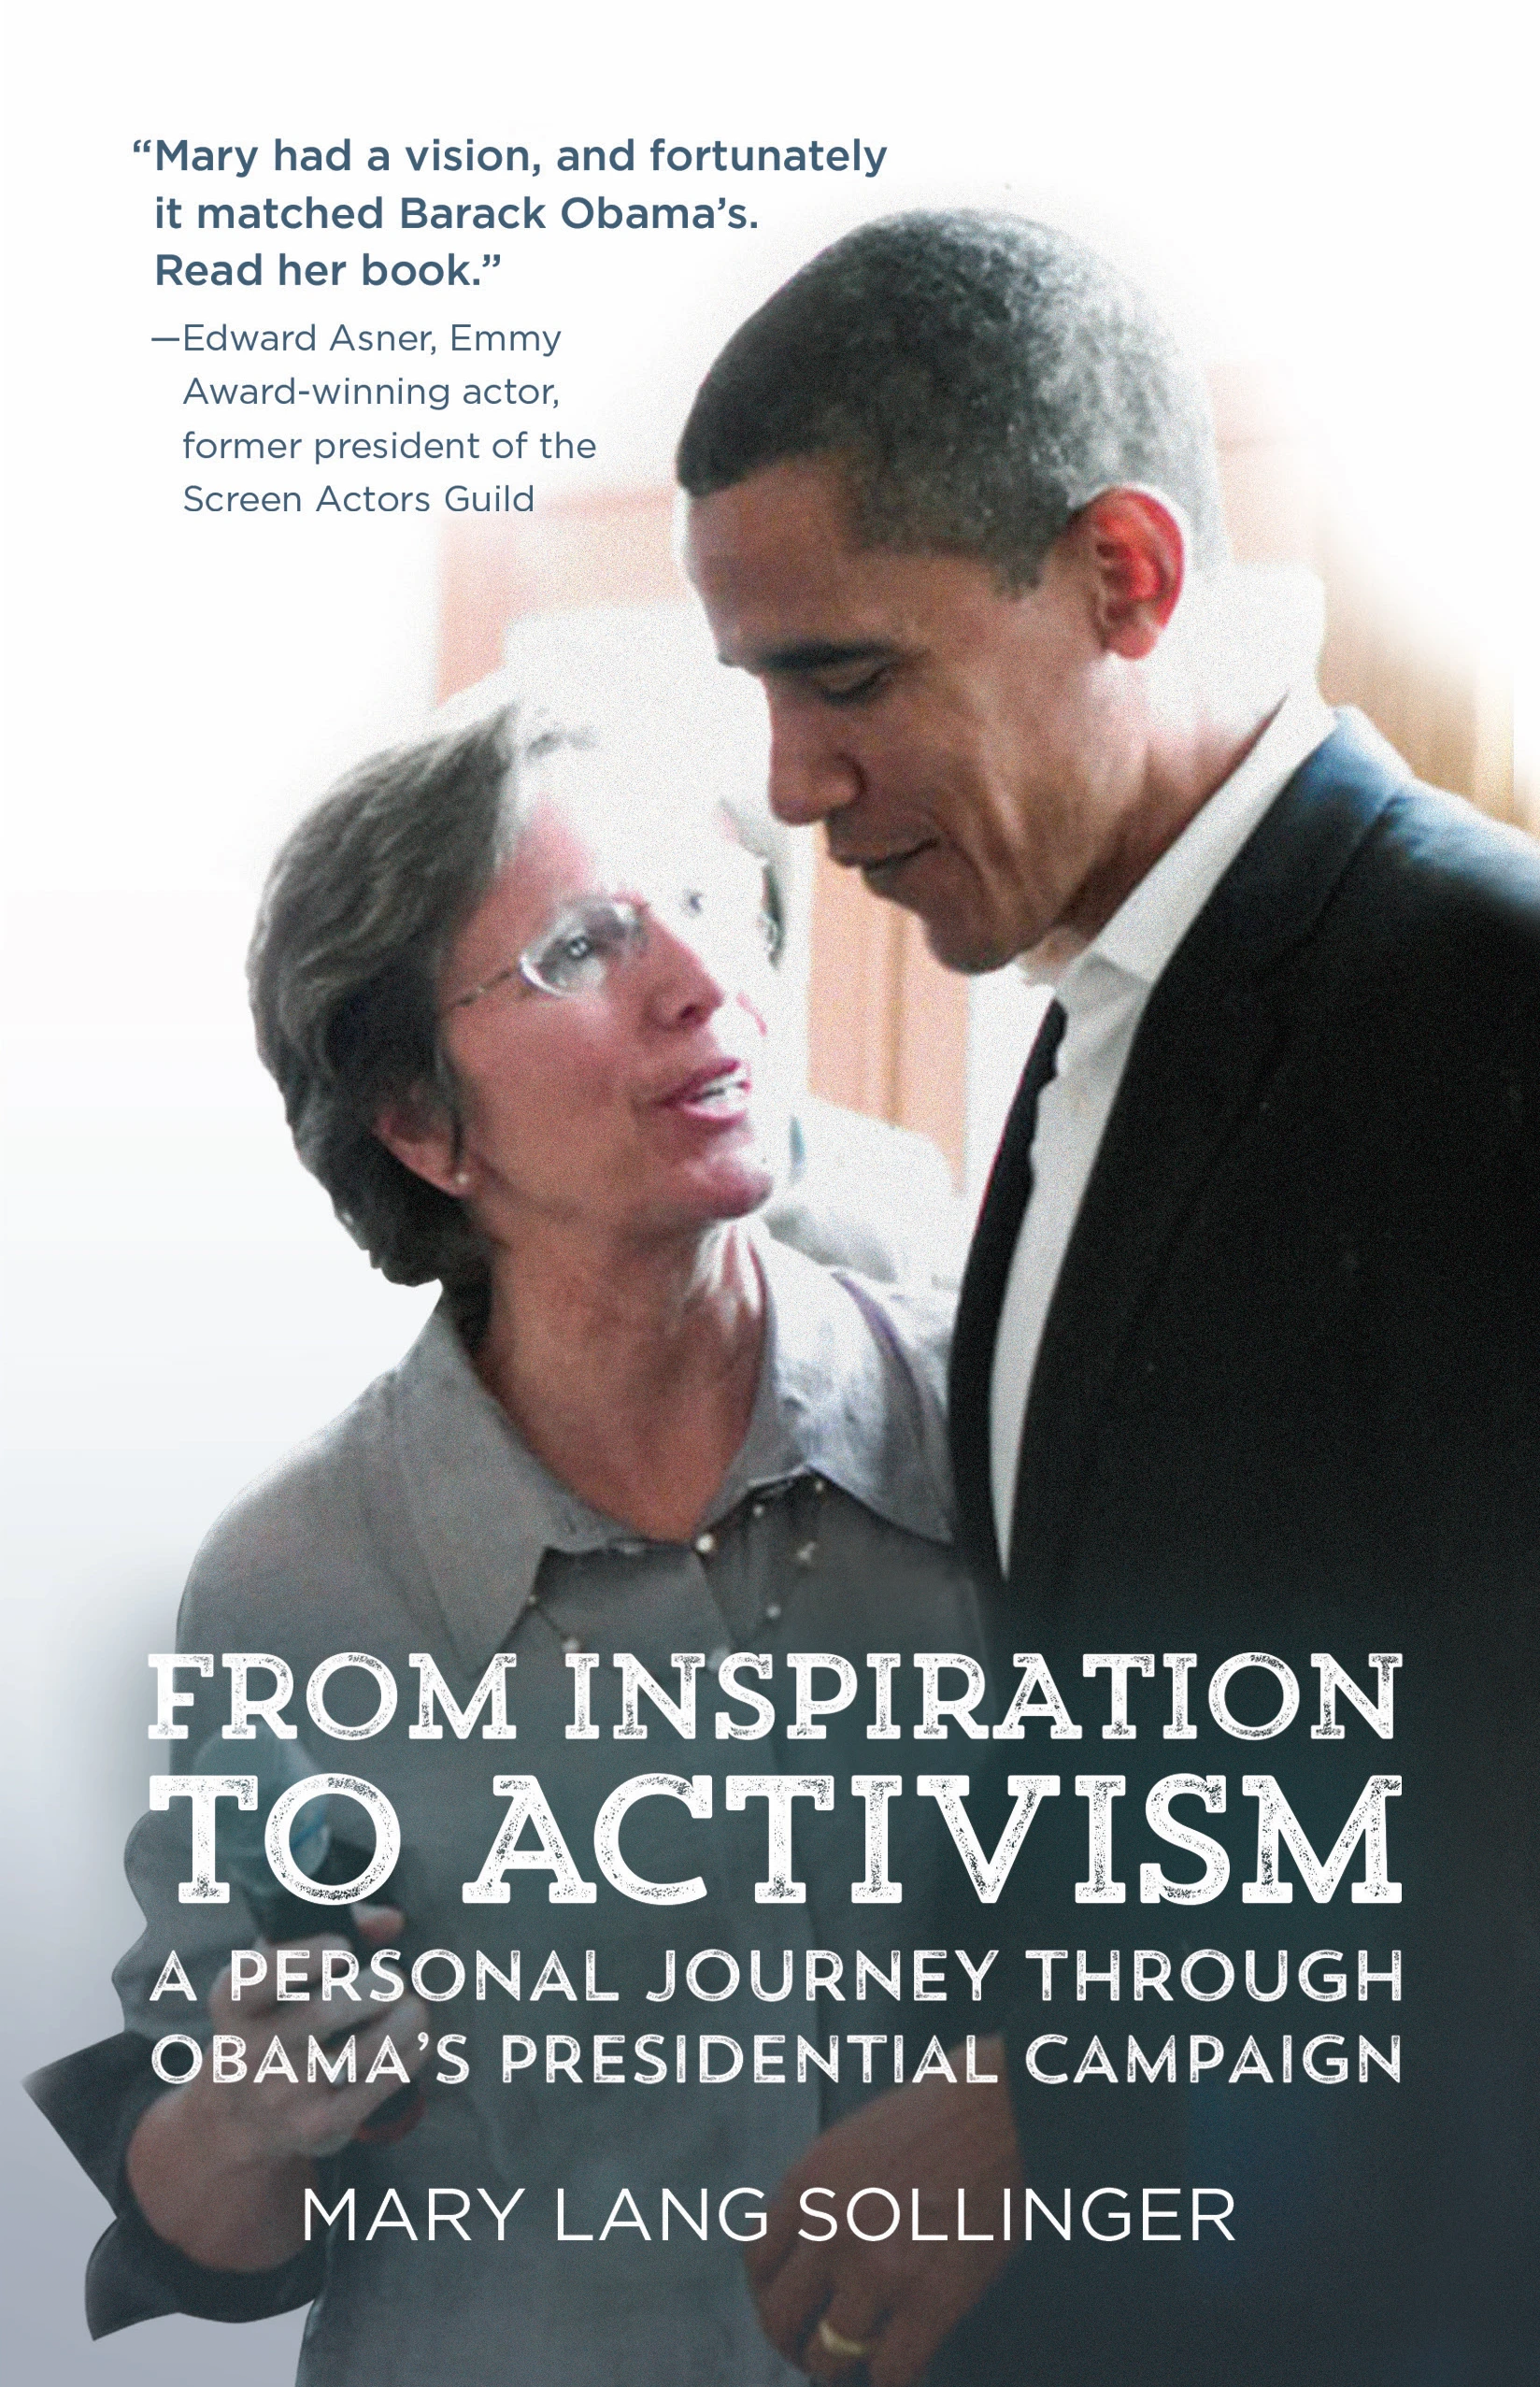 from inspiration to activism book cover